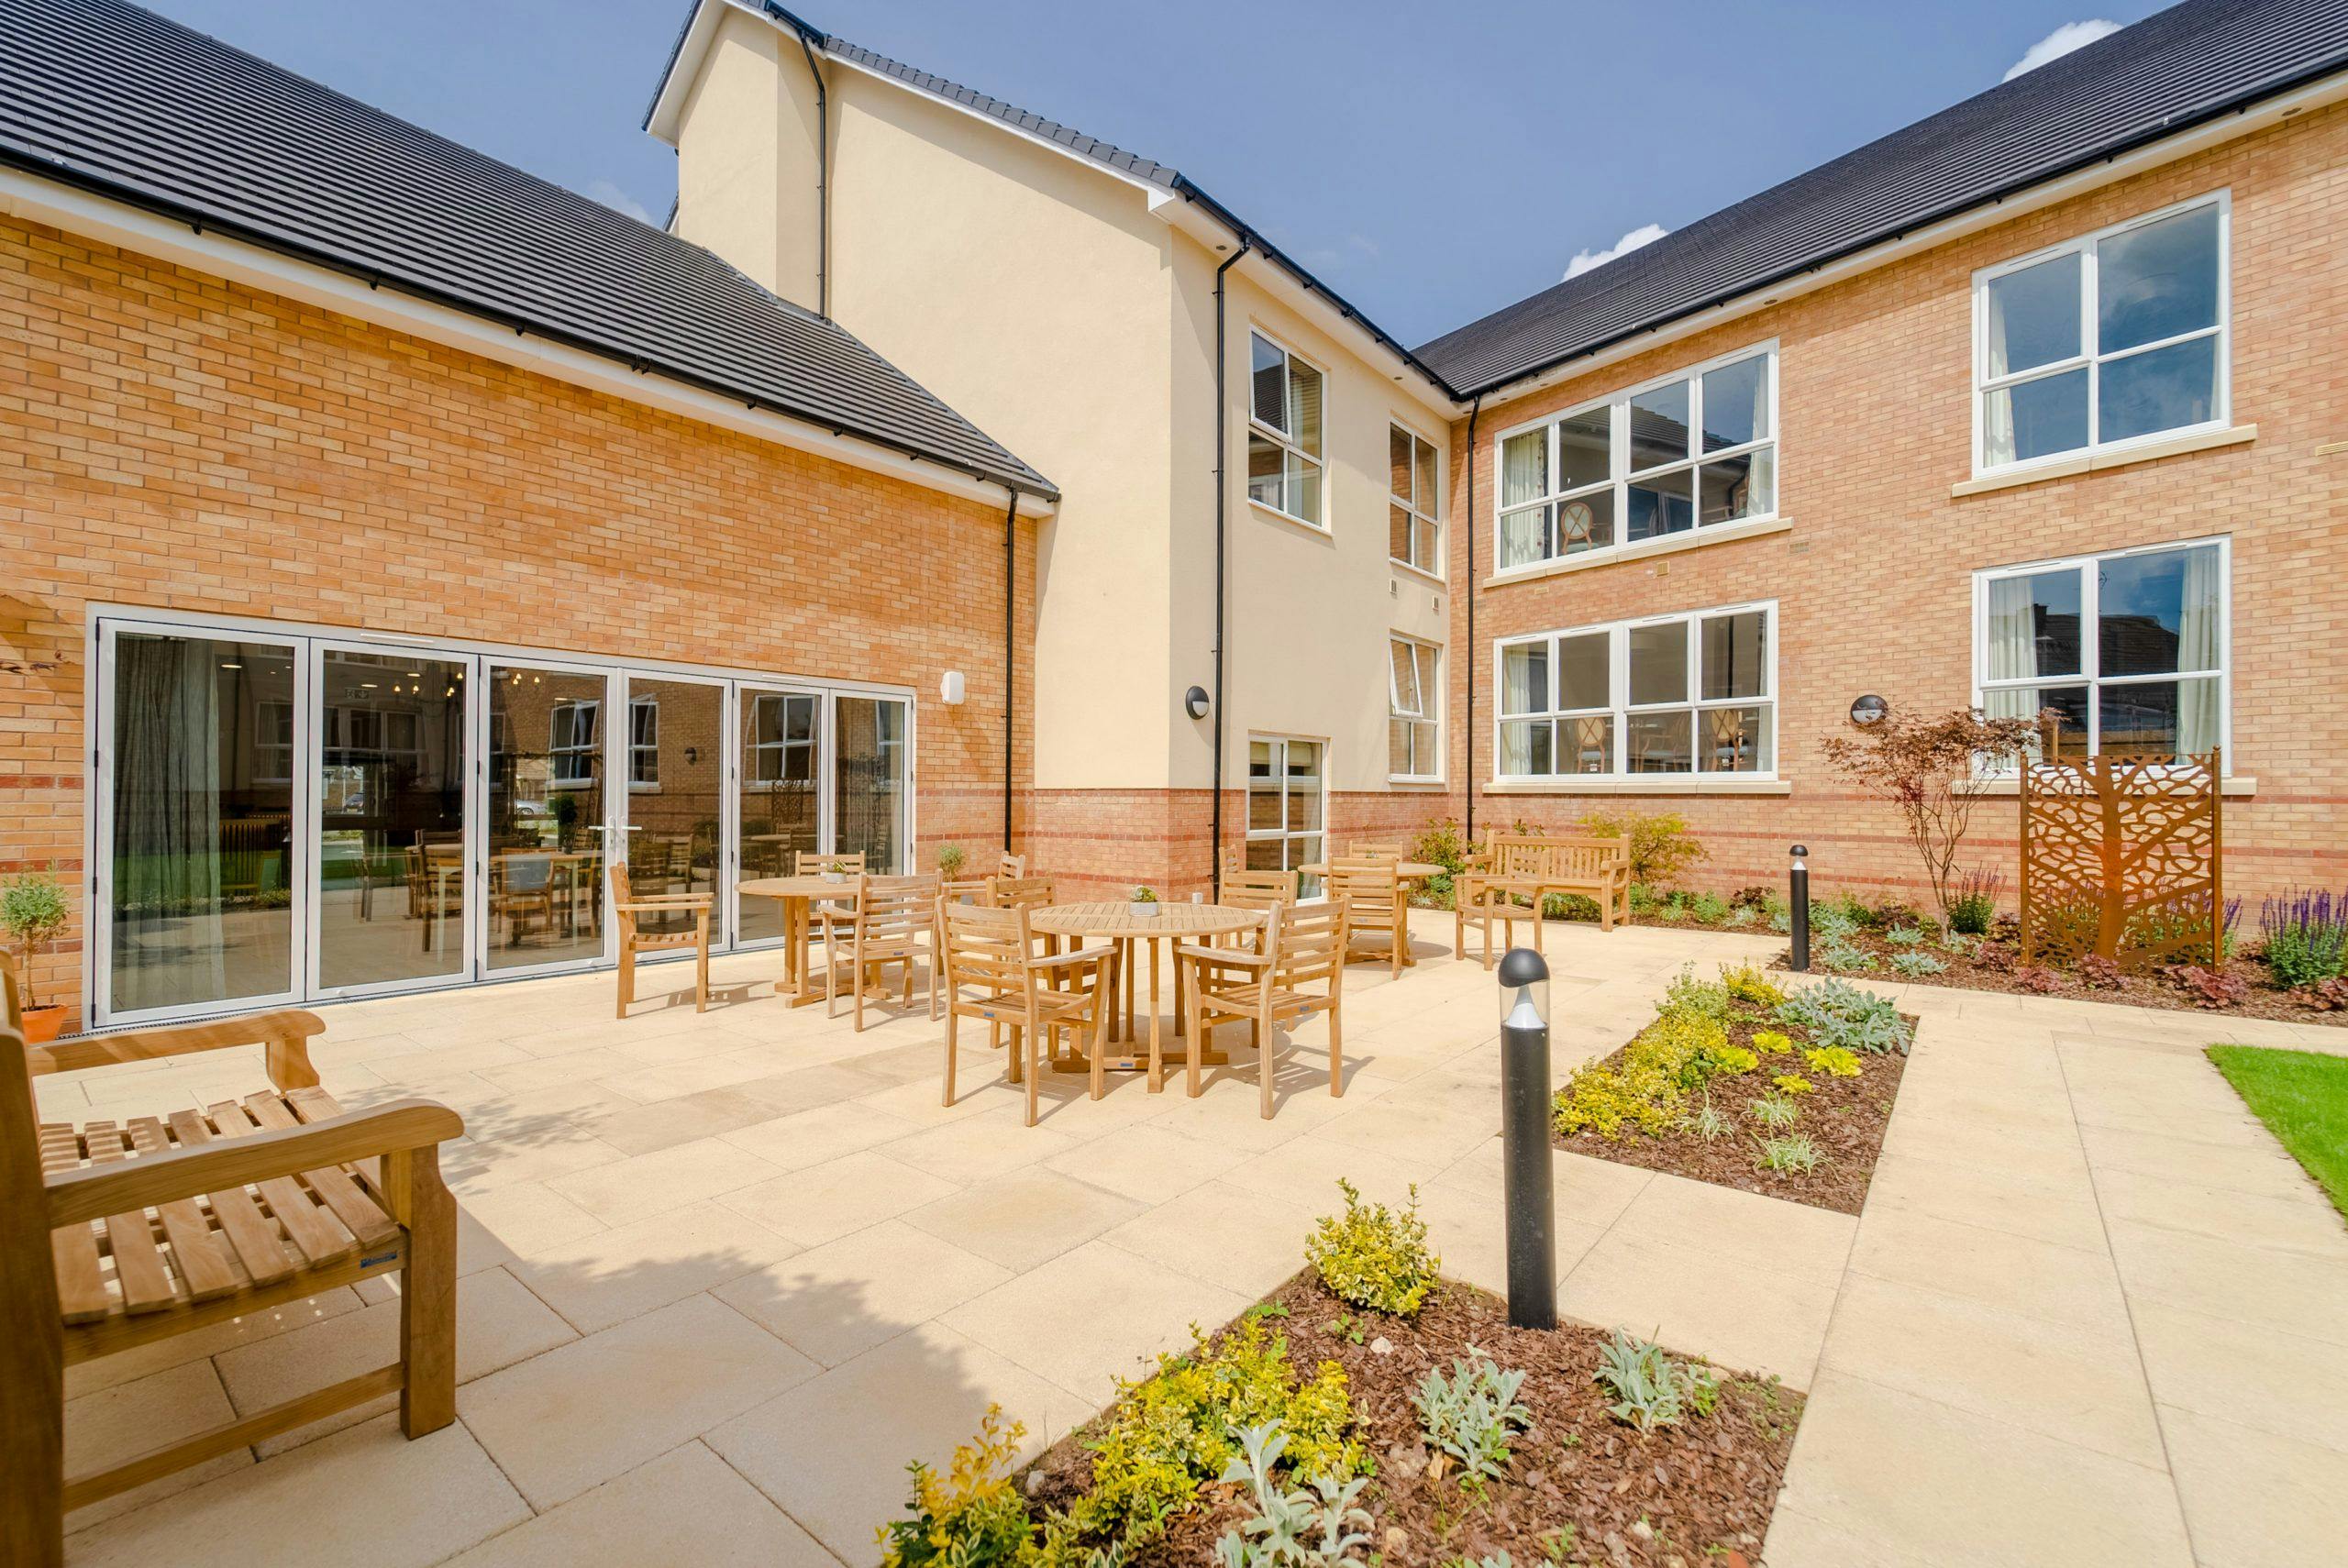 Exterior of Halmer Court care home in Spalding, Lincolshire